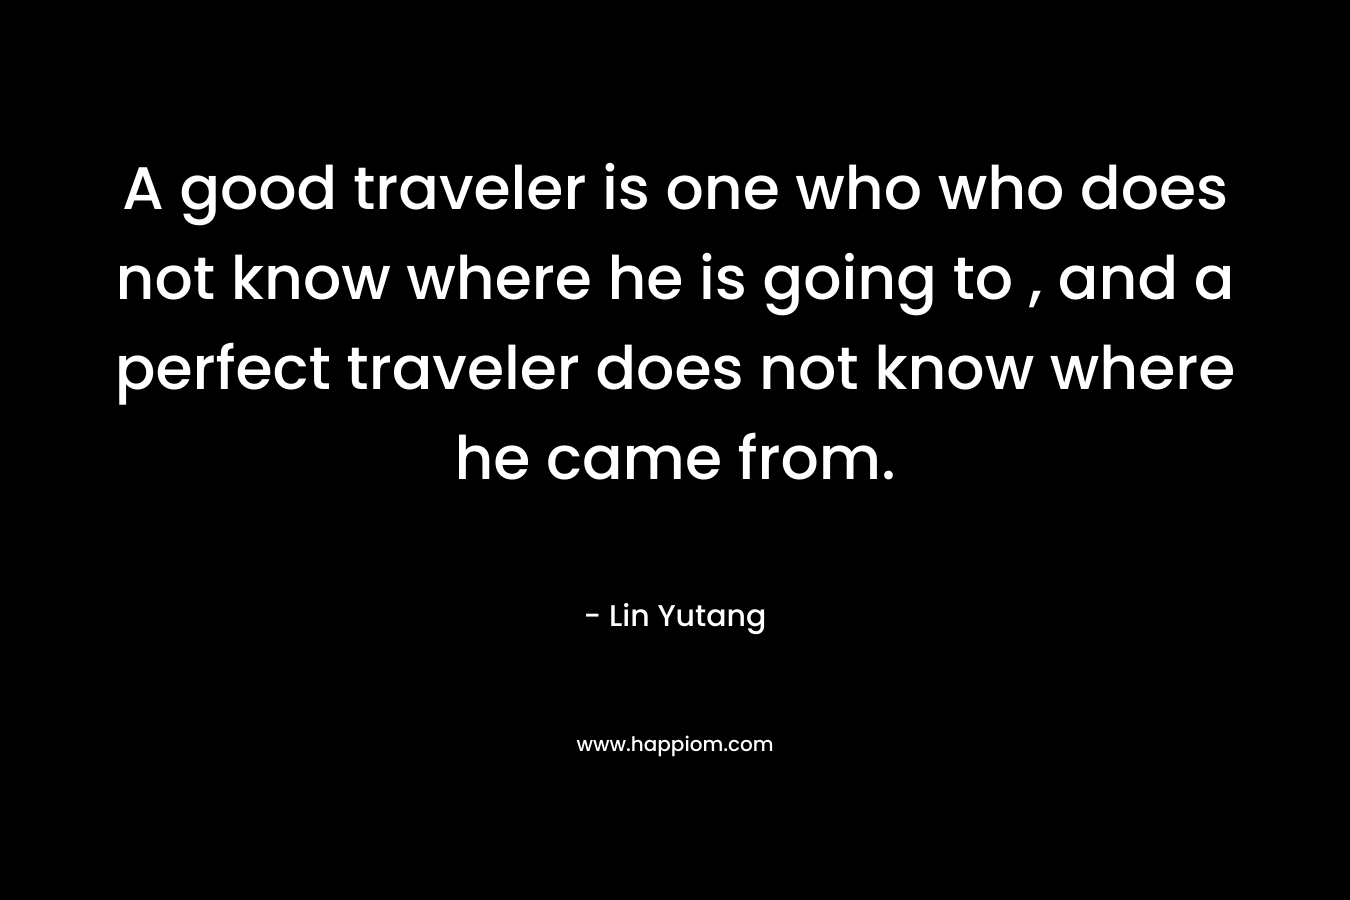 A good traveler is one who who does not know where he is going to , and a perfect traveler does not know where he came from.